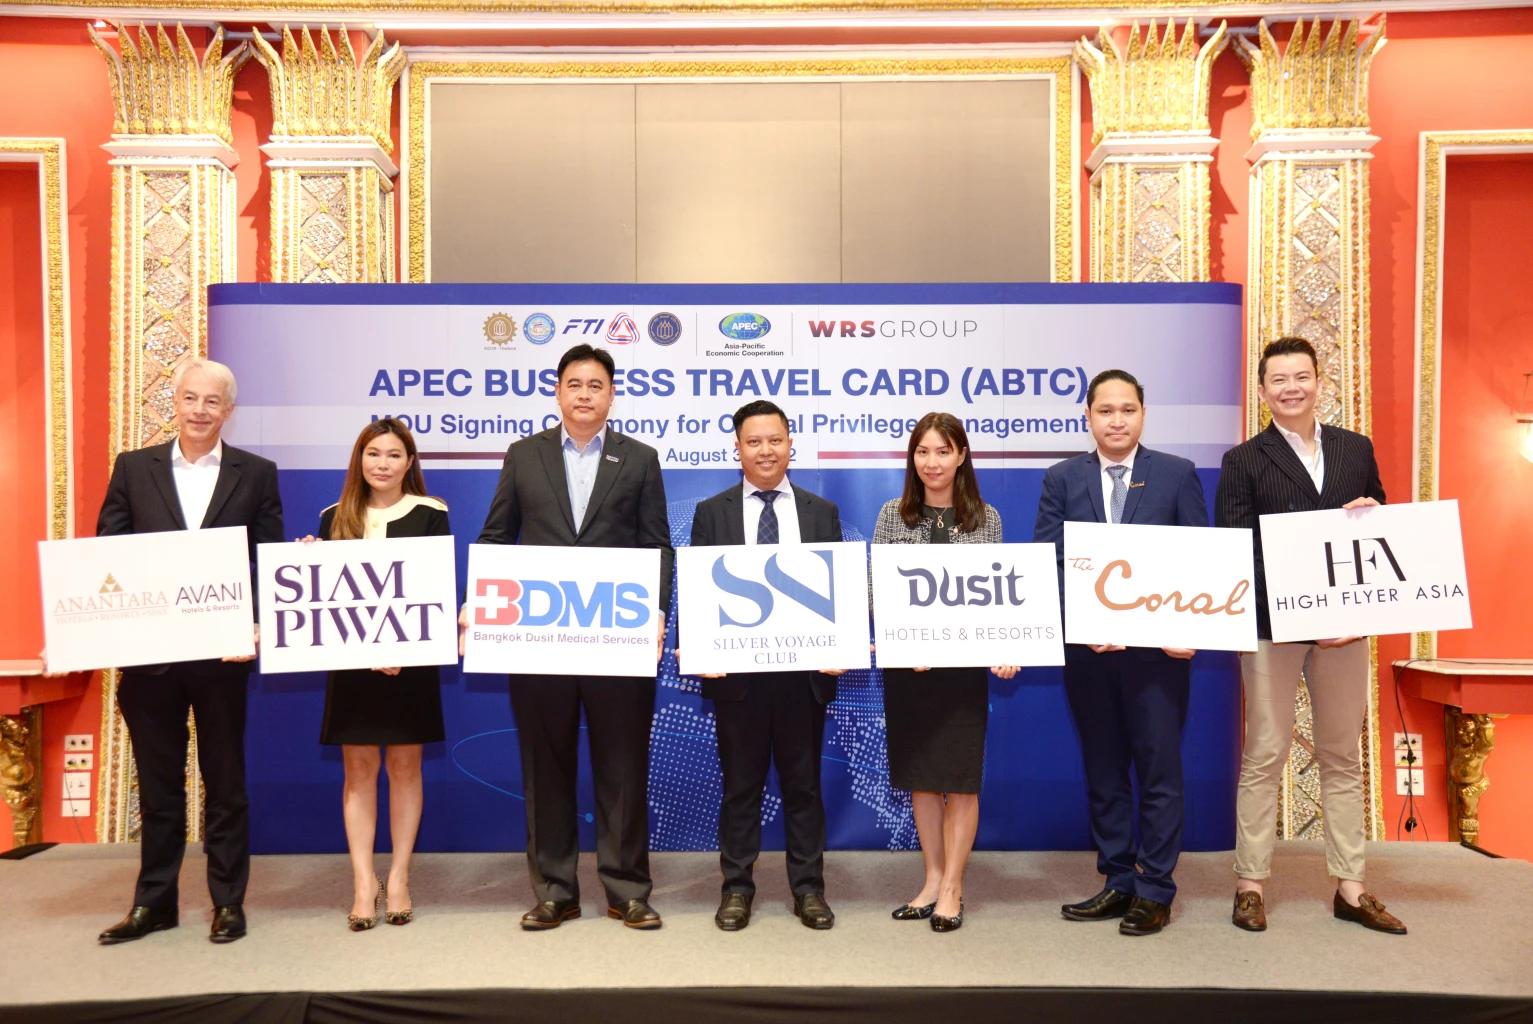 World-class priviledges for Apec travellers